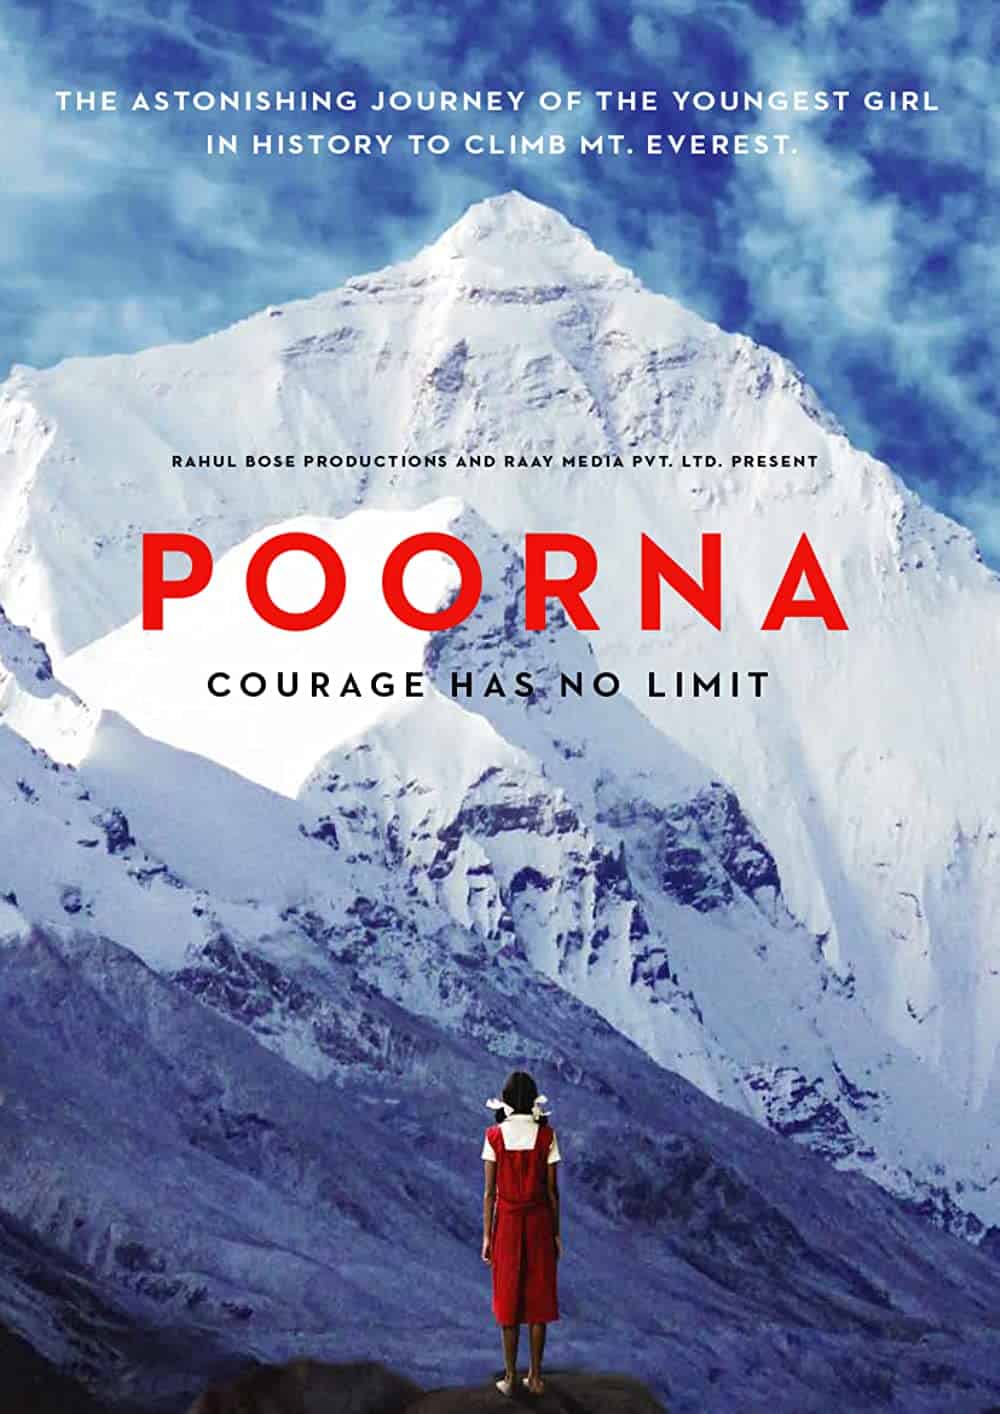 Poorna (2017) Best Mountaineering Movies You Can't Miss